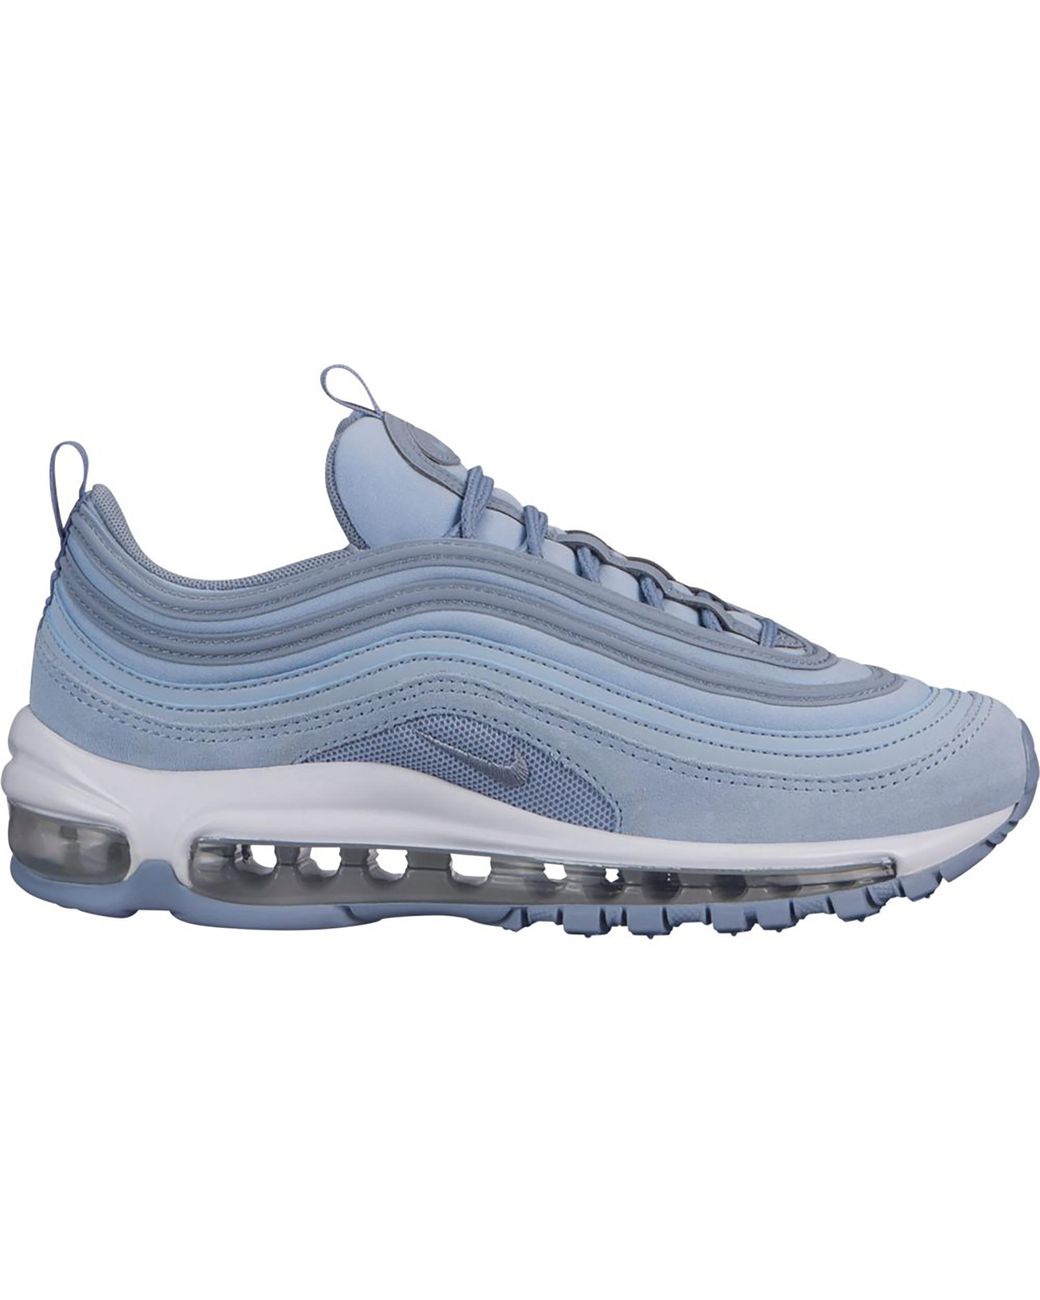 air max 97 white and light blue